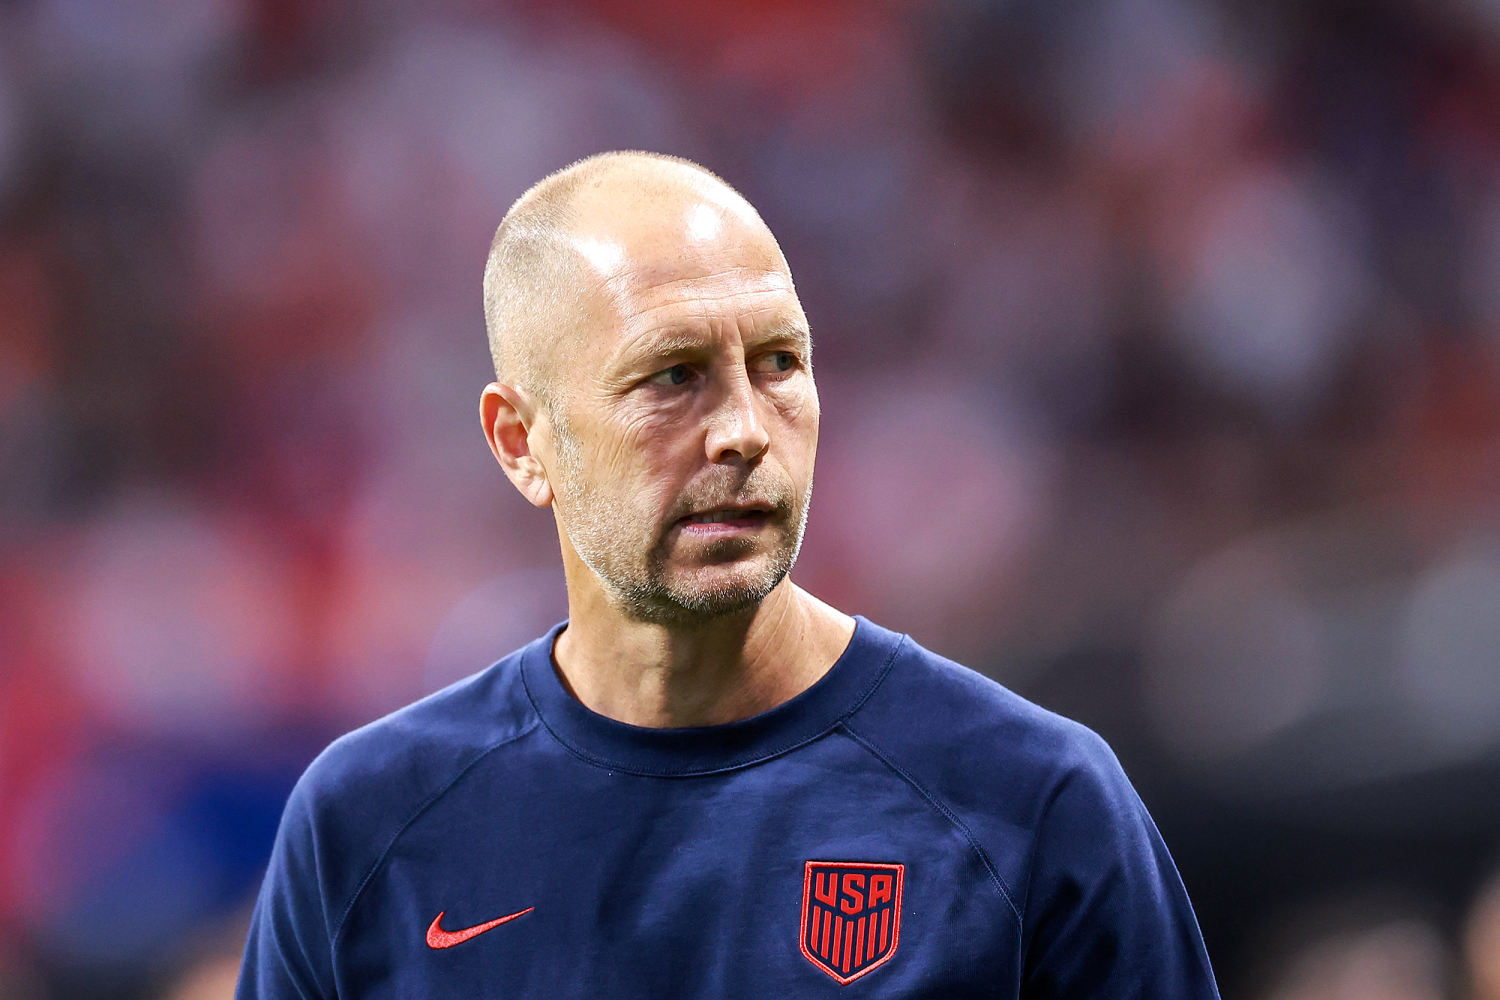 U.S. men's national soccer coach Gregg Berhalter fired after disappointing Copa America showing